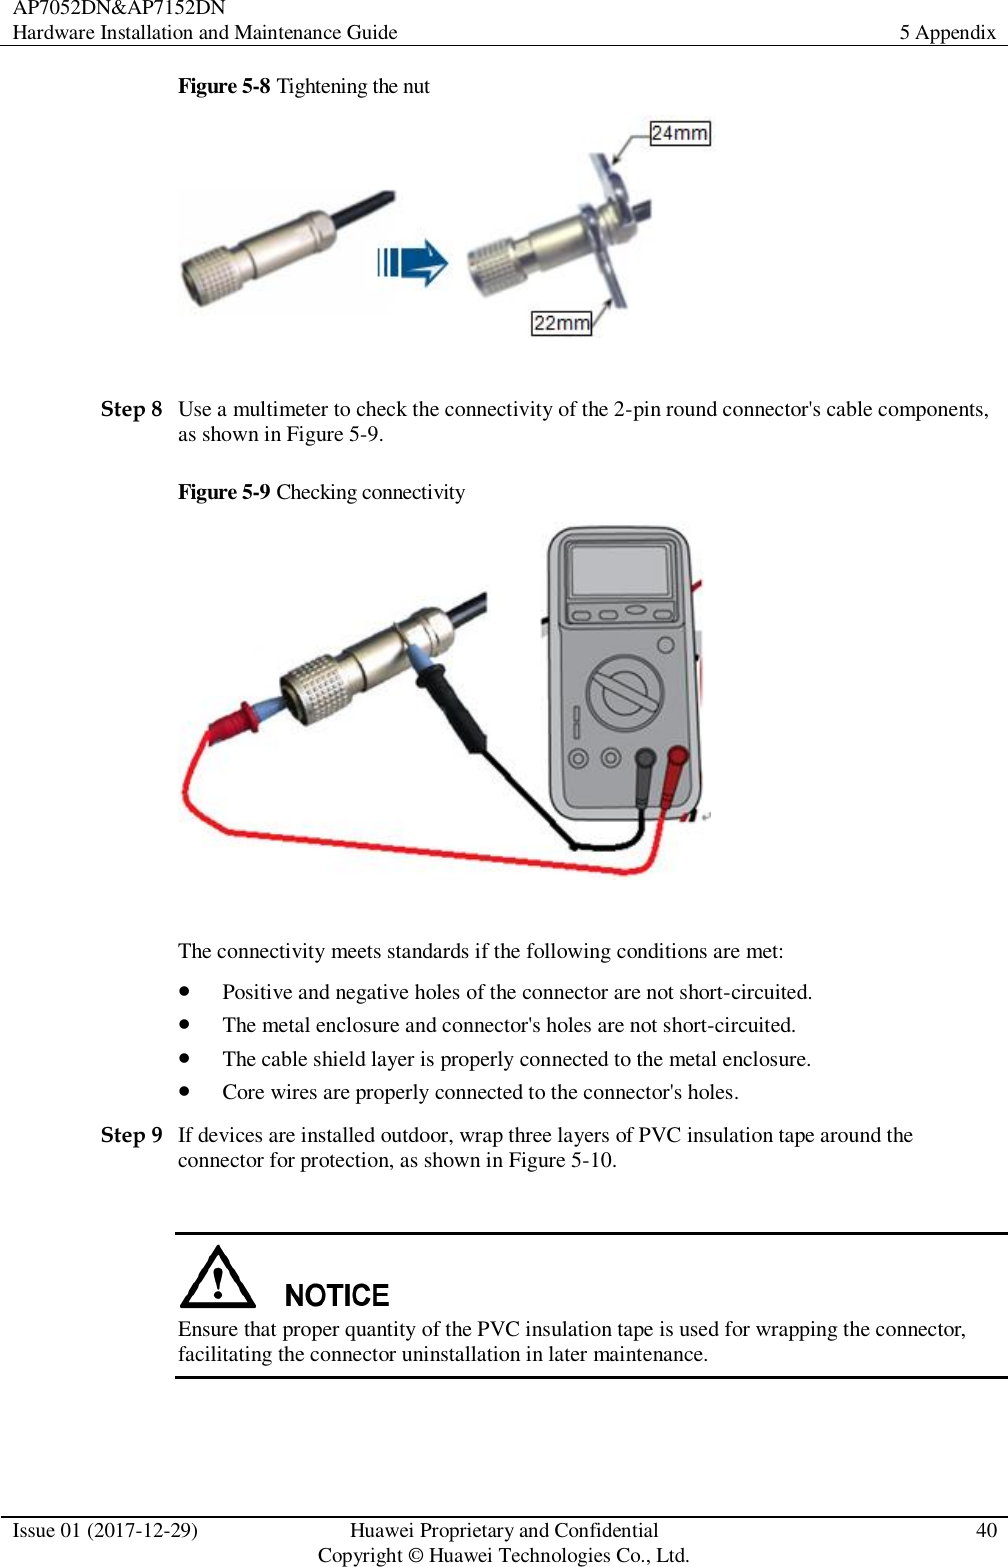 AP7052DN&amp;AP7152DN Hardware Installation and Maintenance Guide 5 Appendix  Issue 01 (2017-12-29) Huawei Proprietary and Confidential                                     Copyright © Huawei Technologies Co., Ltd. 40  Figure 5-8 Tightening the nut   Step 8 Use a multimeter to check the connectivity of the 2-pin round connector&apos;s cable components, as shown in Figure 5-9. Figure 5-9 Checking connectivity   The connectivity meets standards if the following conditions are met:    Positive and negative holes of the connector are not short-circuited.    The metal enclosure and connector&apos;s holes are not short-circuited.    The cable shield layer is properly connected to the metal enclosure.    Core wires are properly connected to the connector&apos;s holes.   Step 9 If devices are installed outdoor, wrap three layers of PVC insulation tape around the connector for protection, as shown in Figure 5-10.   Ensure that proper quantity of the PVC insulation tape is used for wrapping the connector, facilitating the connector uninstallation in later maintenance. 